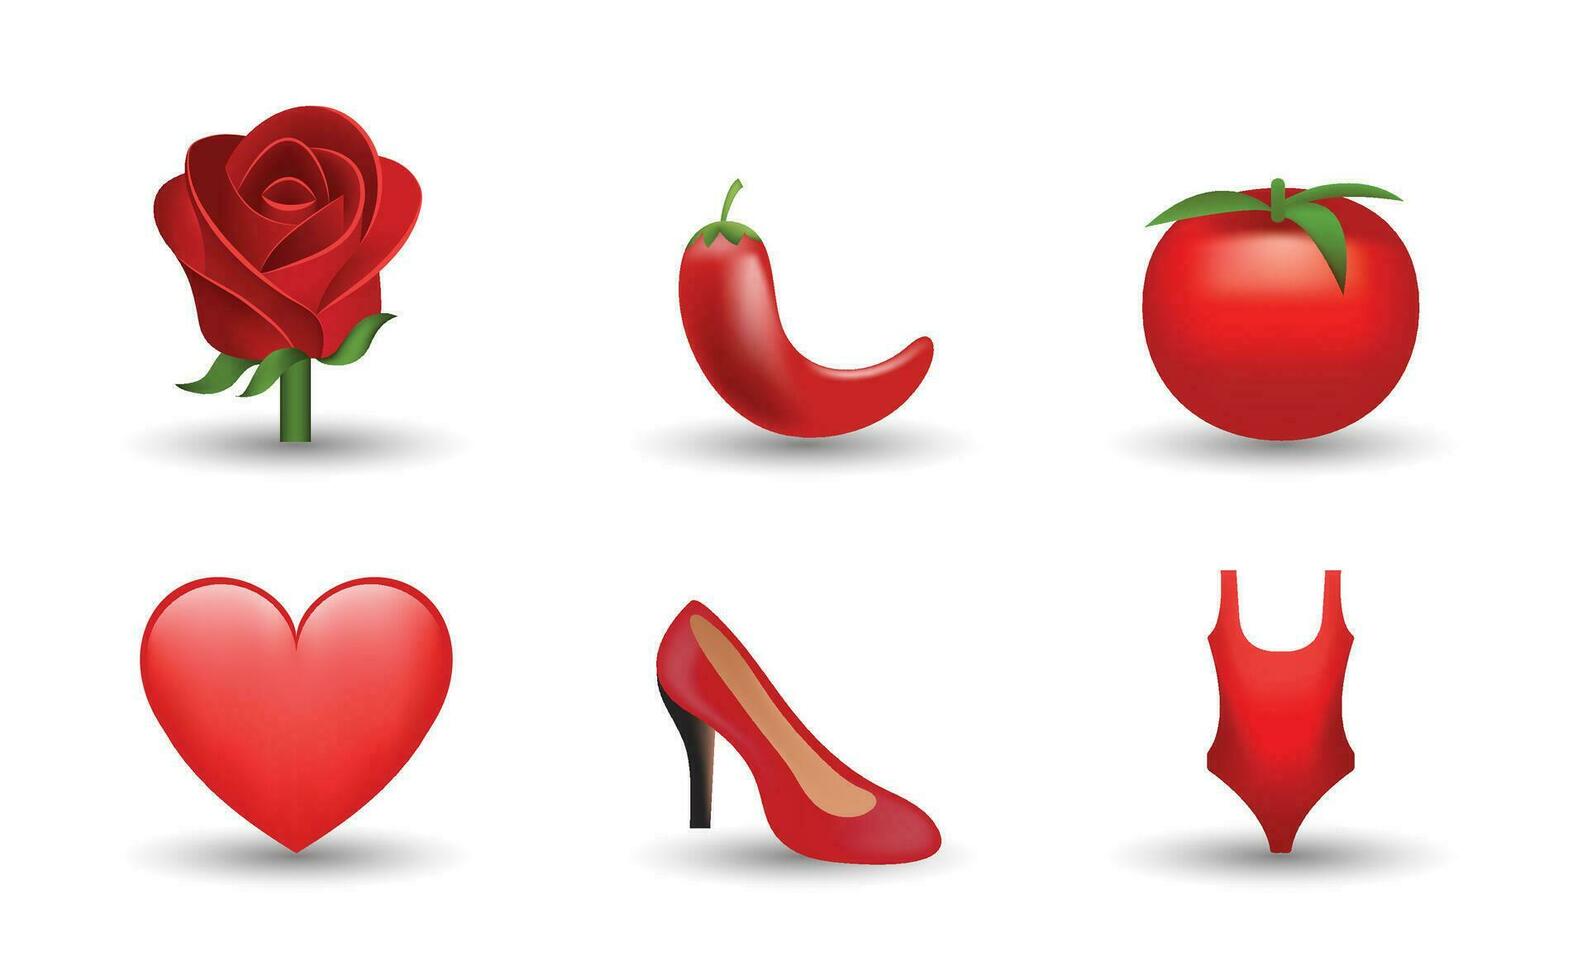 6 Emoticon isolated on White Background. Isolated Vector Illustration. Red rose, pepper, tomato, heart, high heel shoe, swimsuit vector emoji Illustration. Set of 3d objects Illustration in red color.